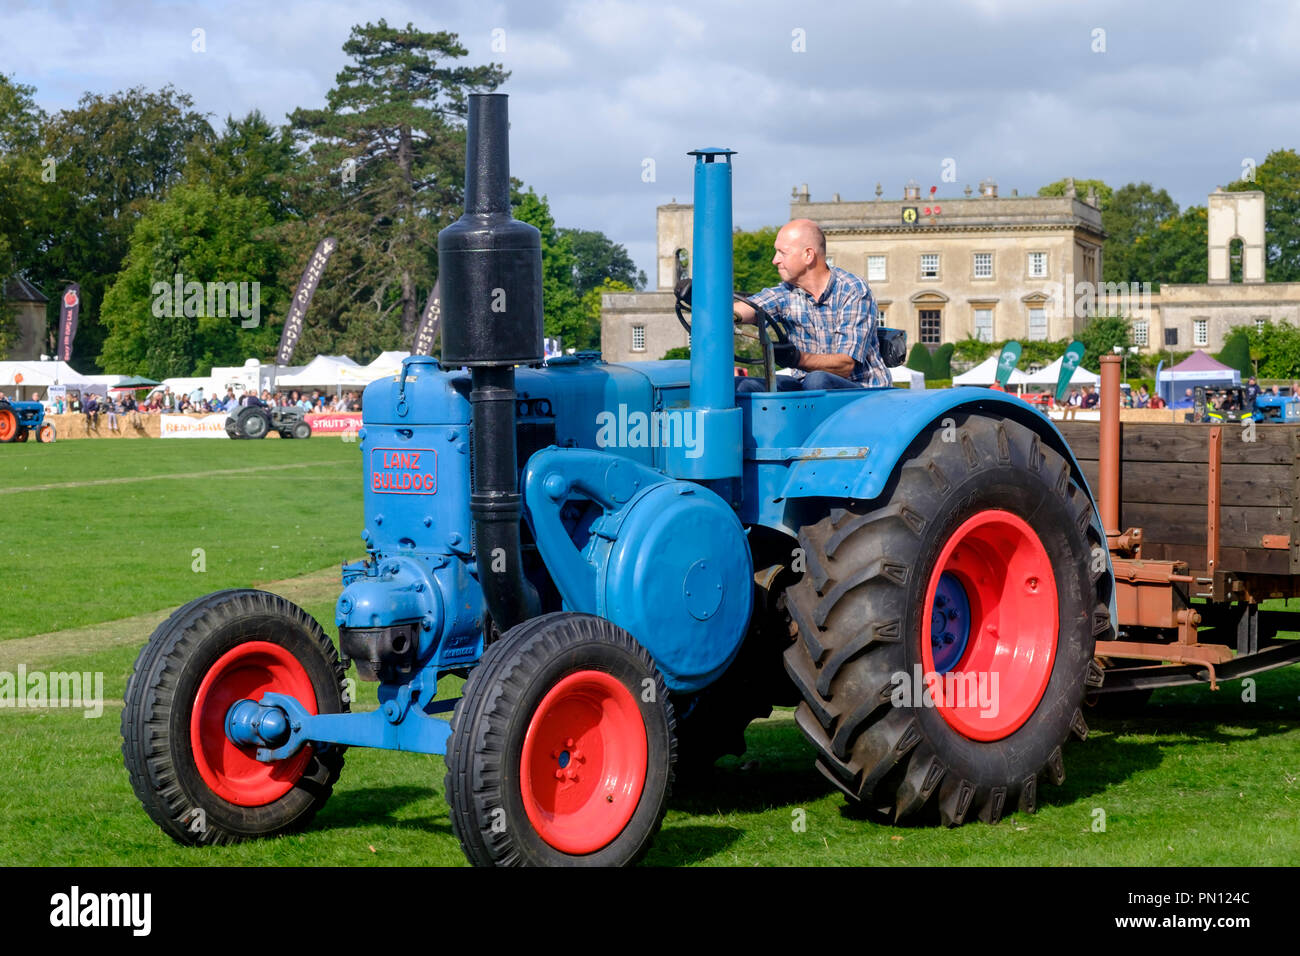 Tractors in the main Ring at the 2018 Frampton conutry show gloucestershire UK Stock Photo